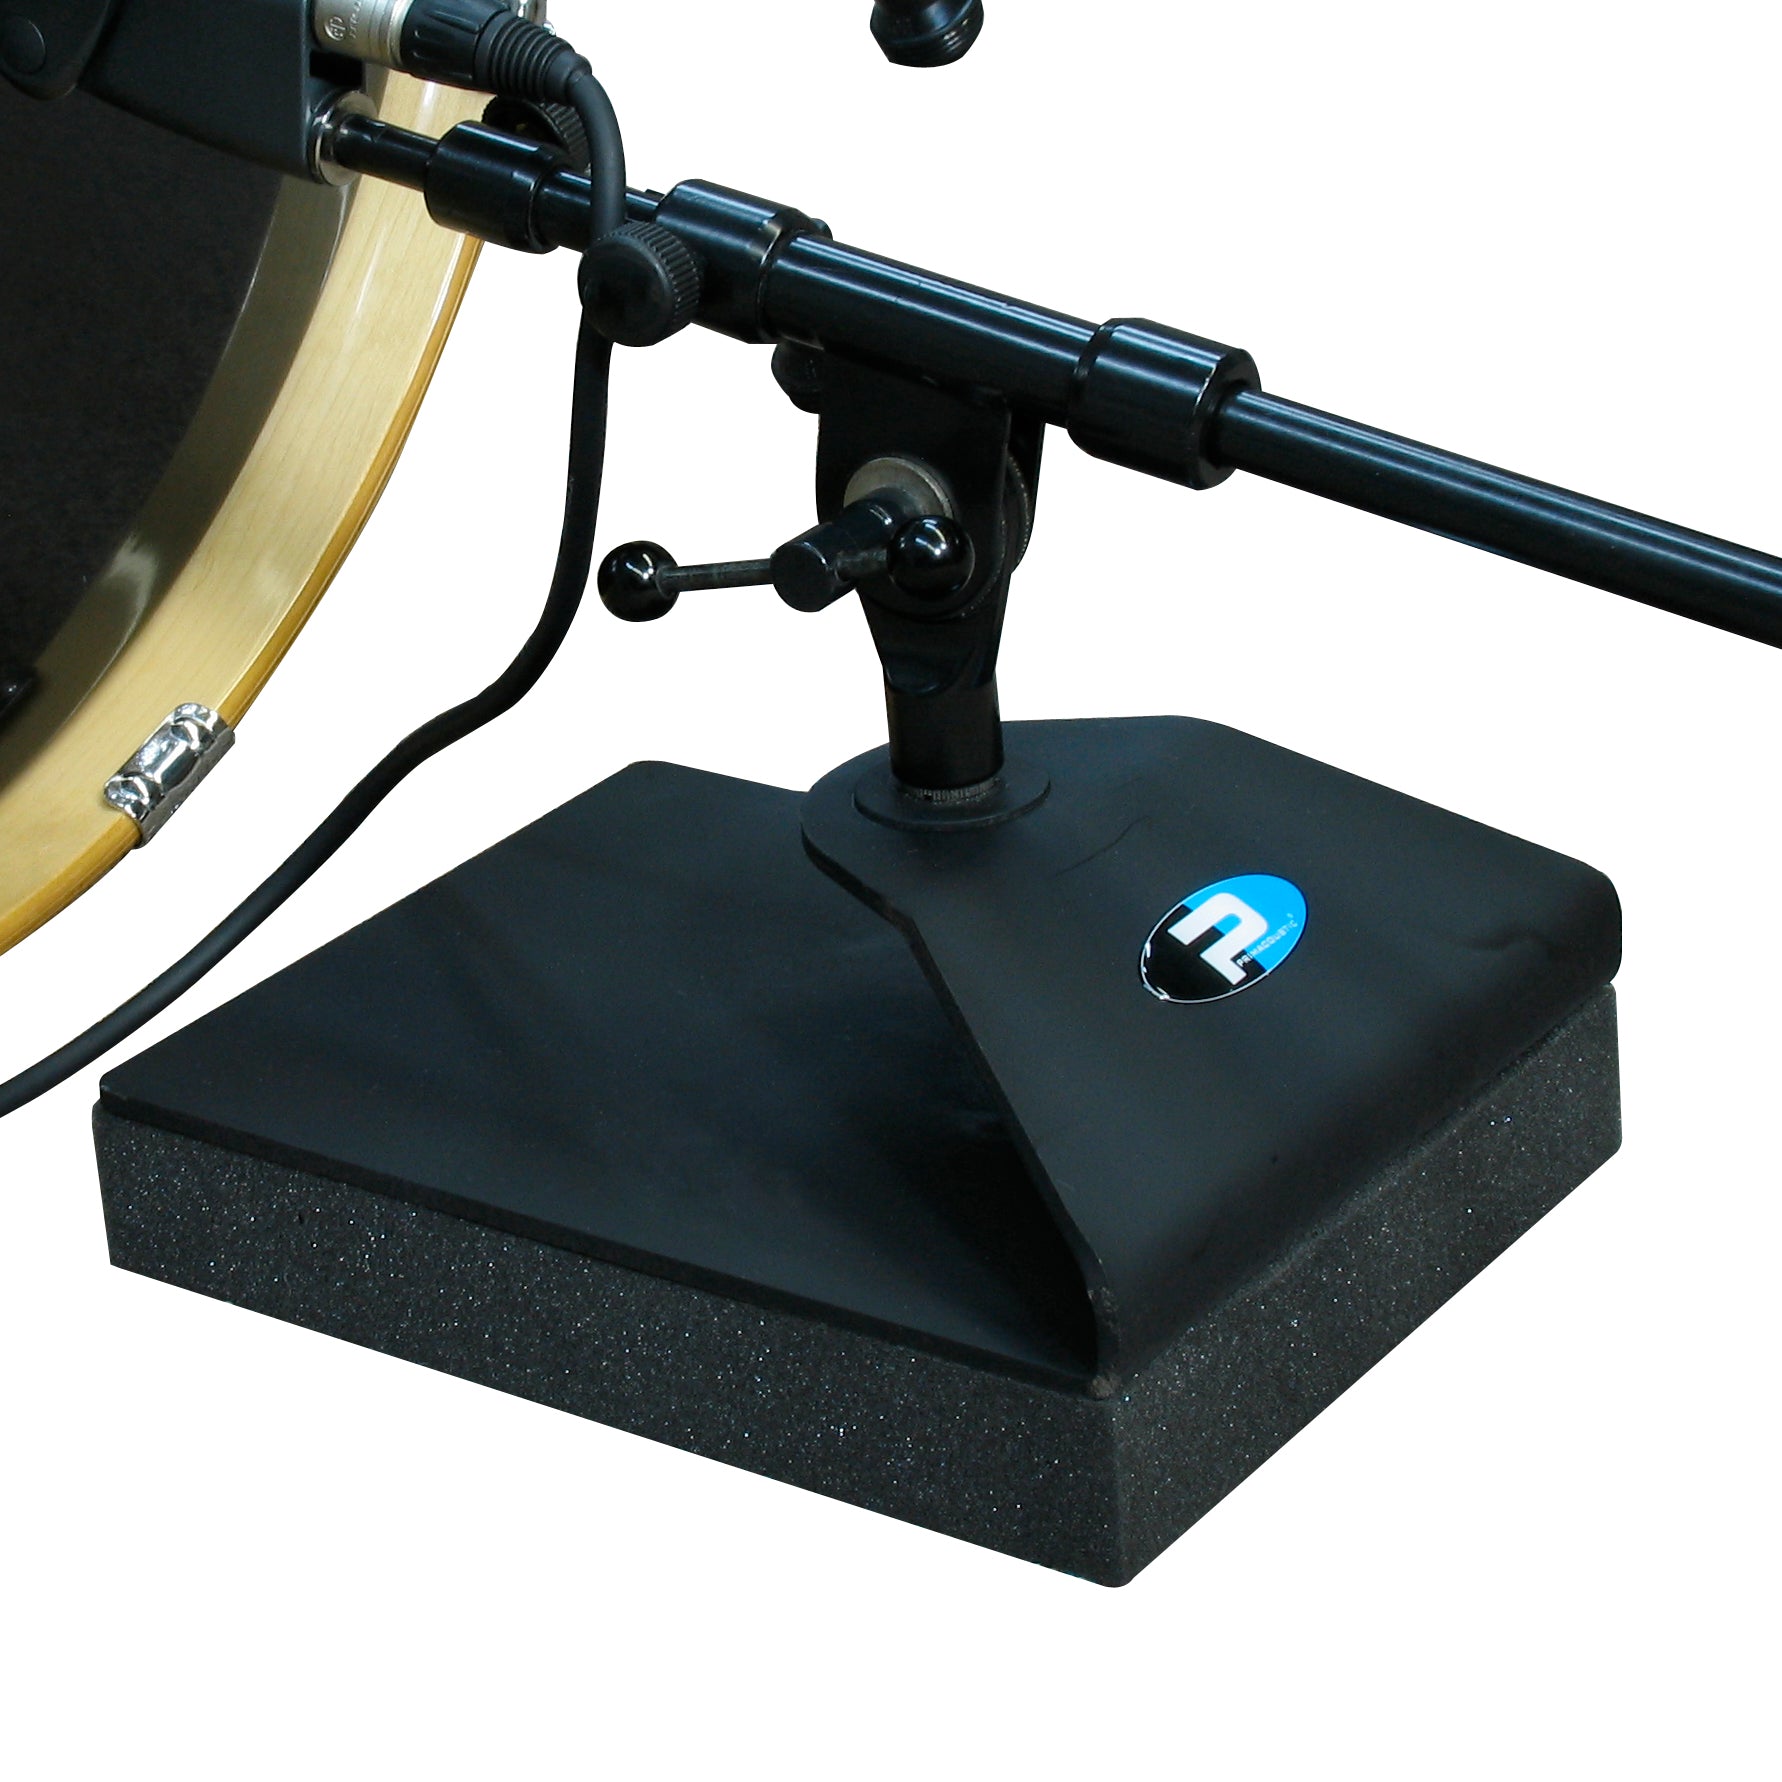 Primacoustic Kick Stand - Bass Drum Microphone Stand - Accessories - Professional Audio Design, Inc